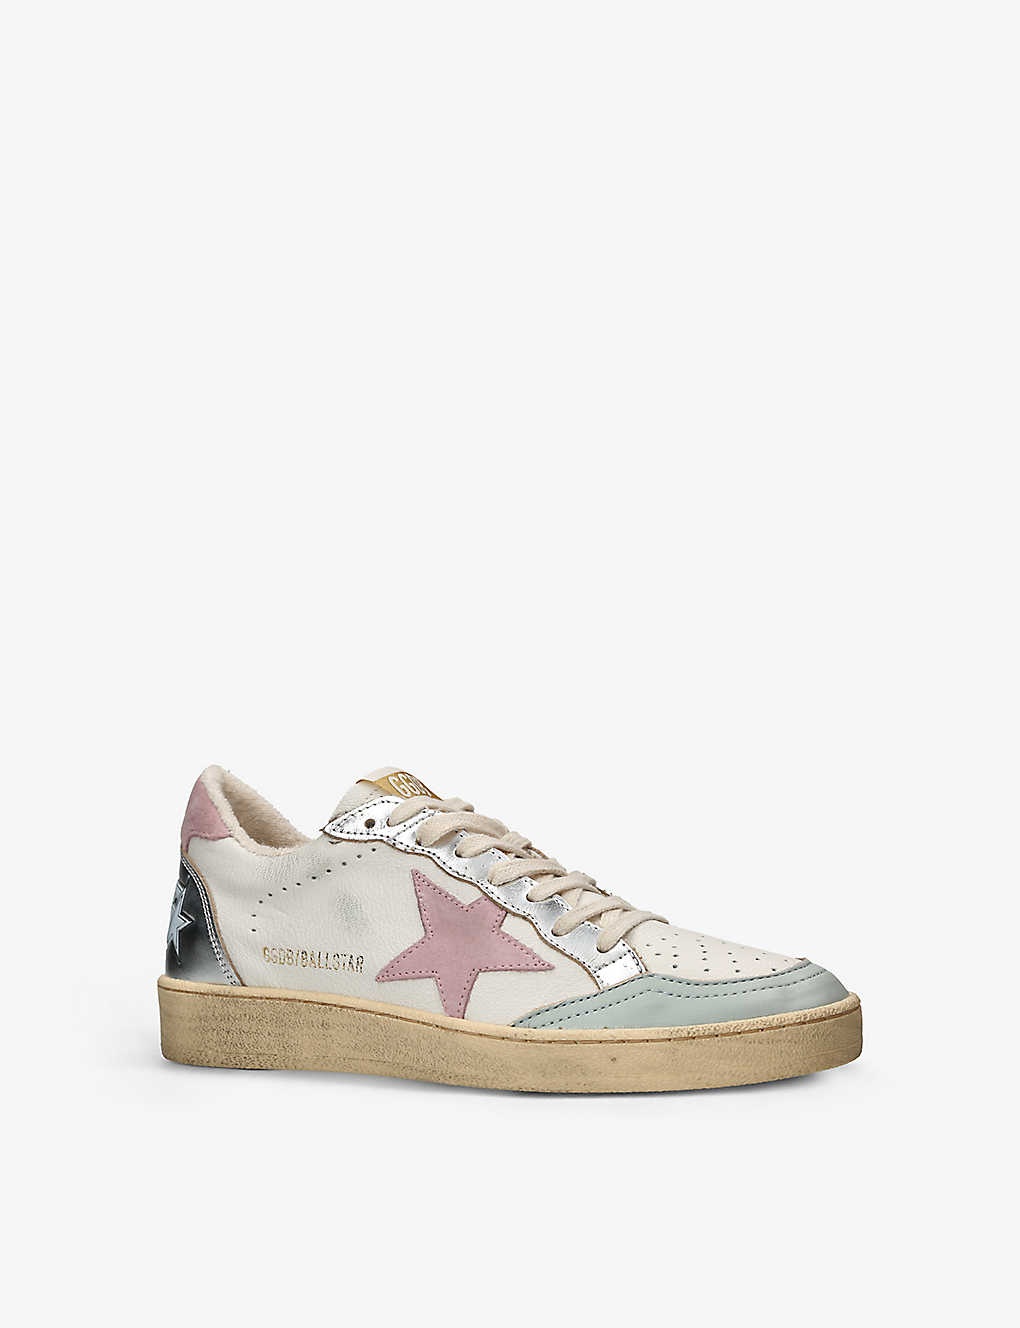 Ball Star suede star-patch leather trainers - 3